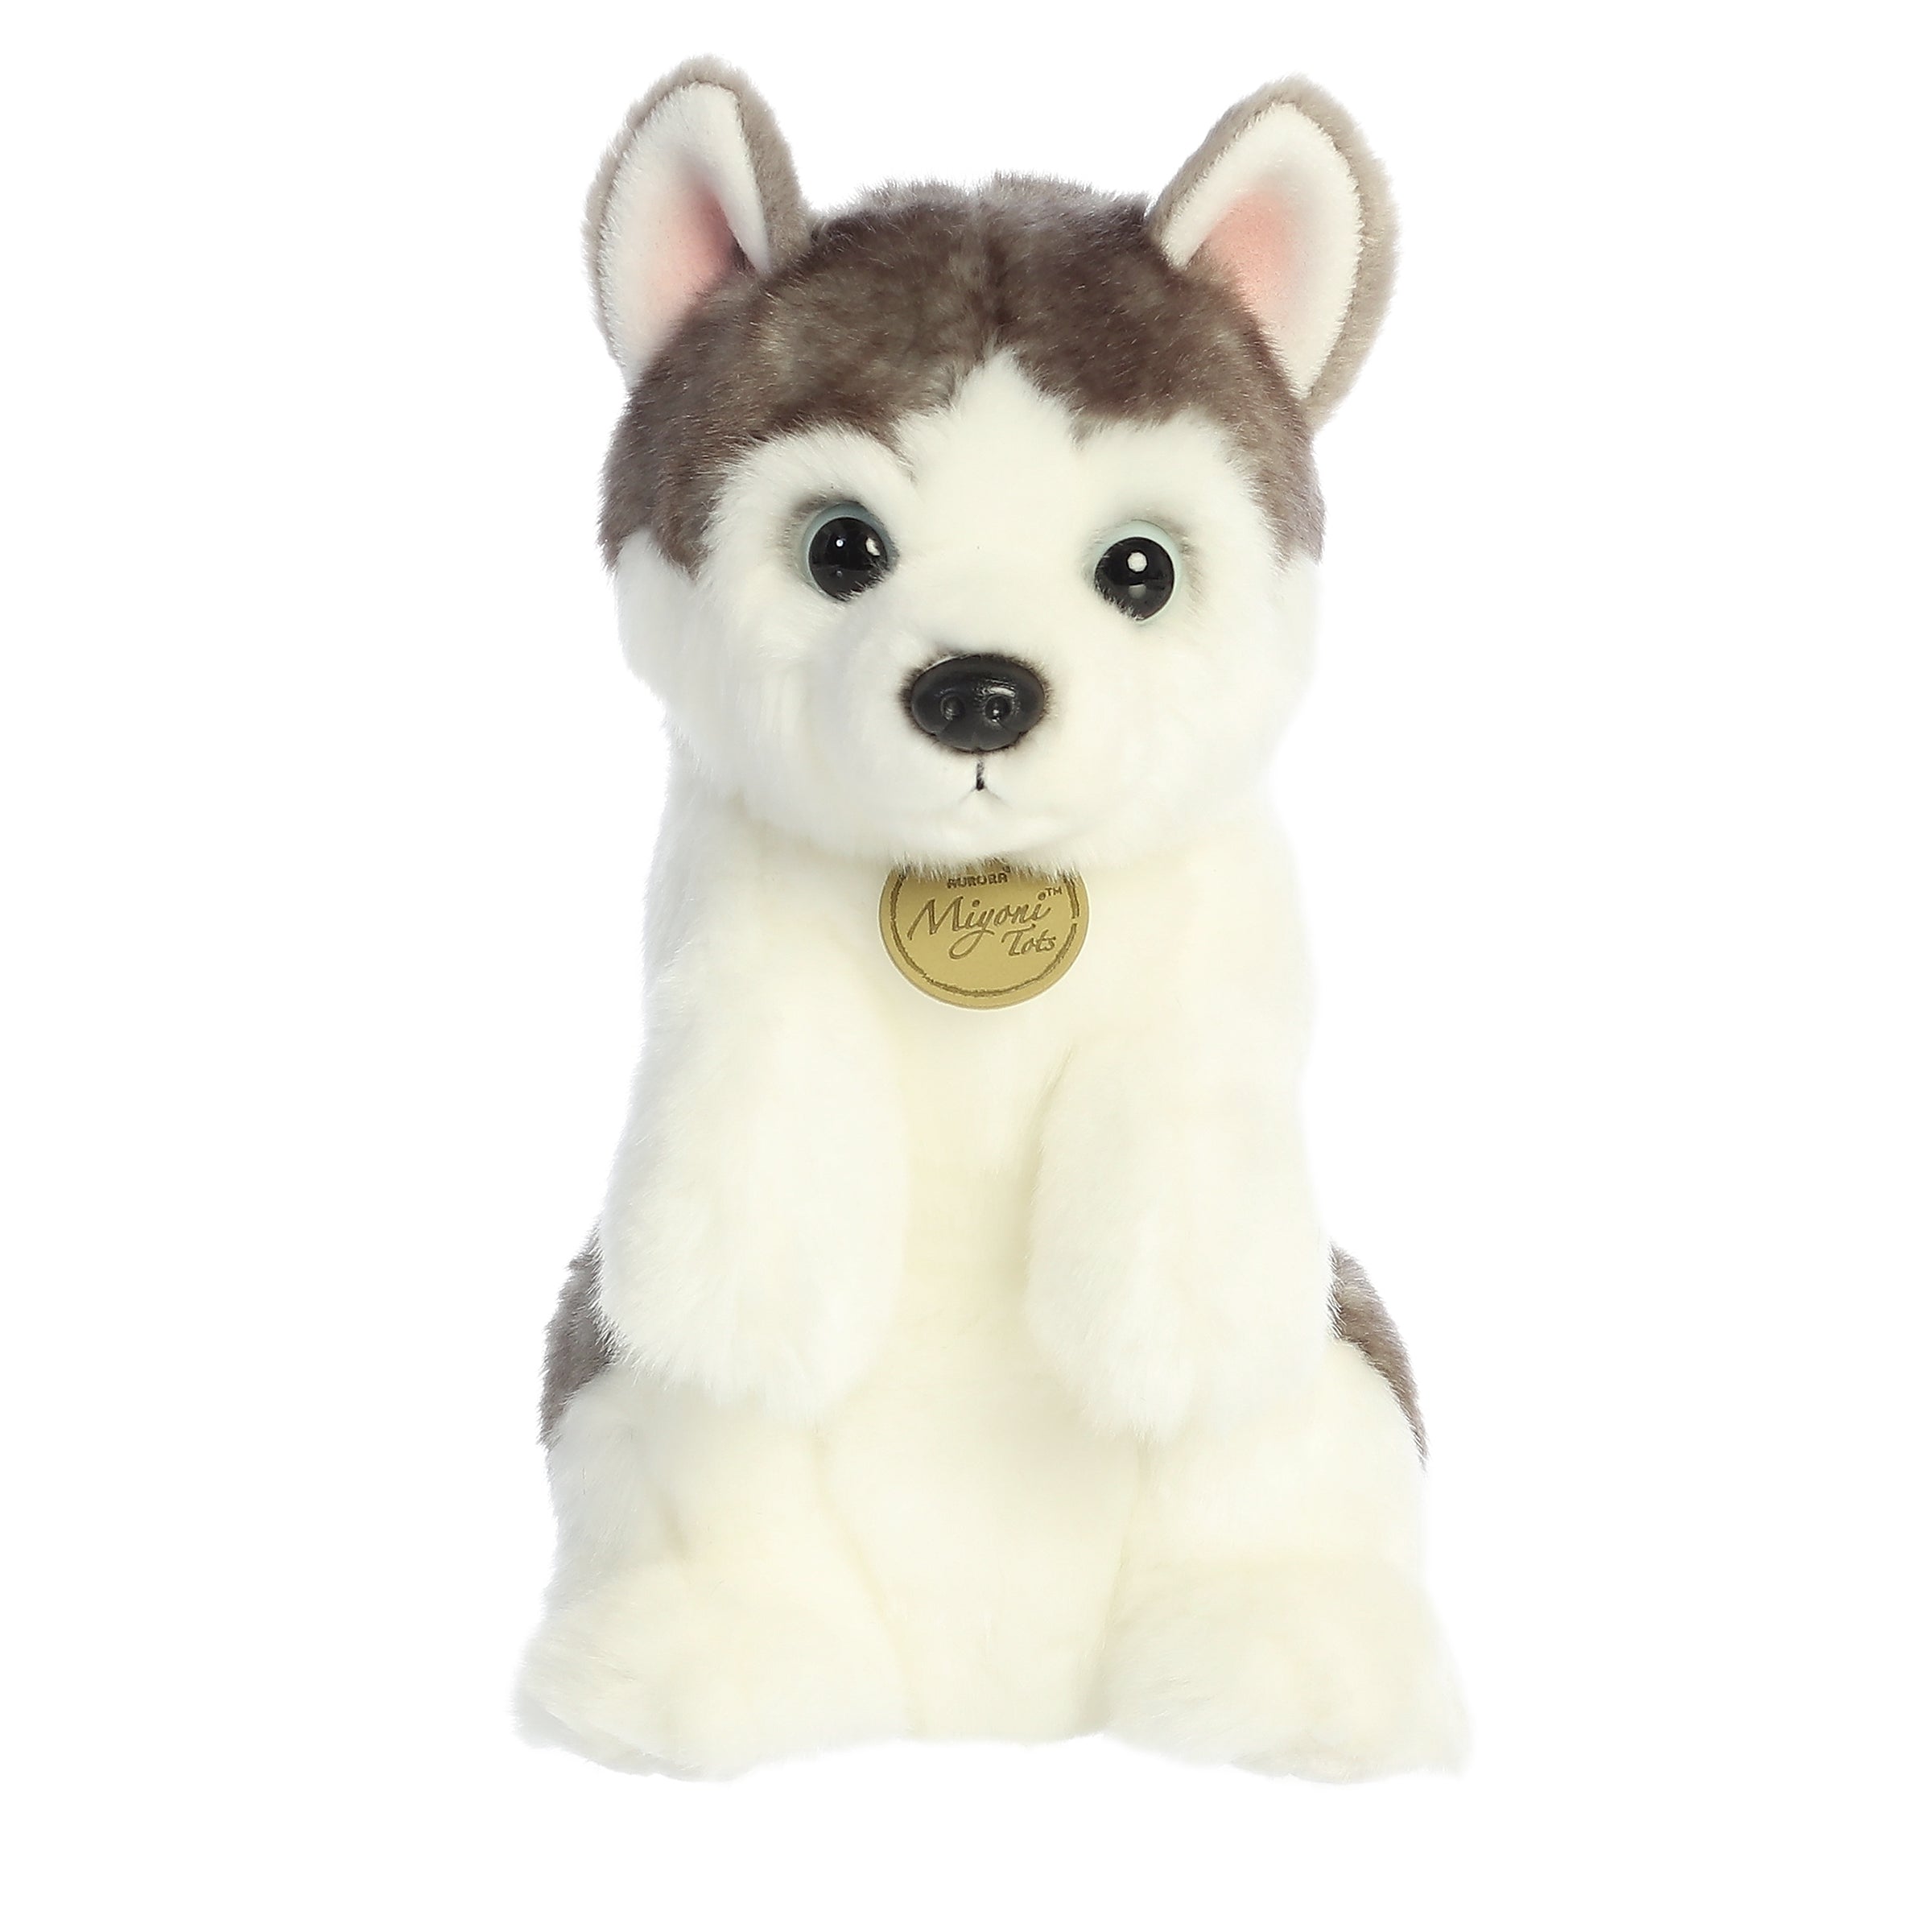 Husky Pup plush with detailed white and gray fur, sitting cheerfully and radiating a spirit of playful curiosity and charm.